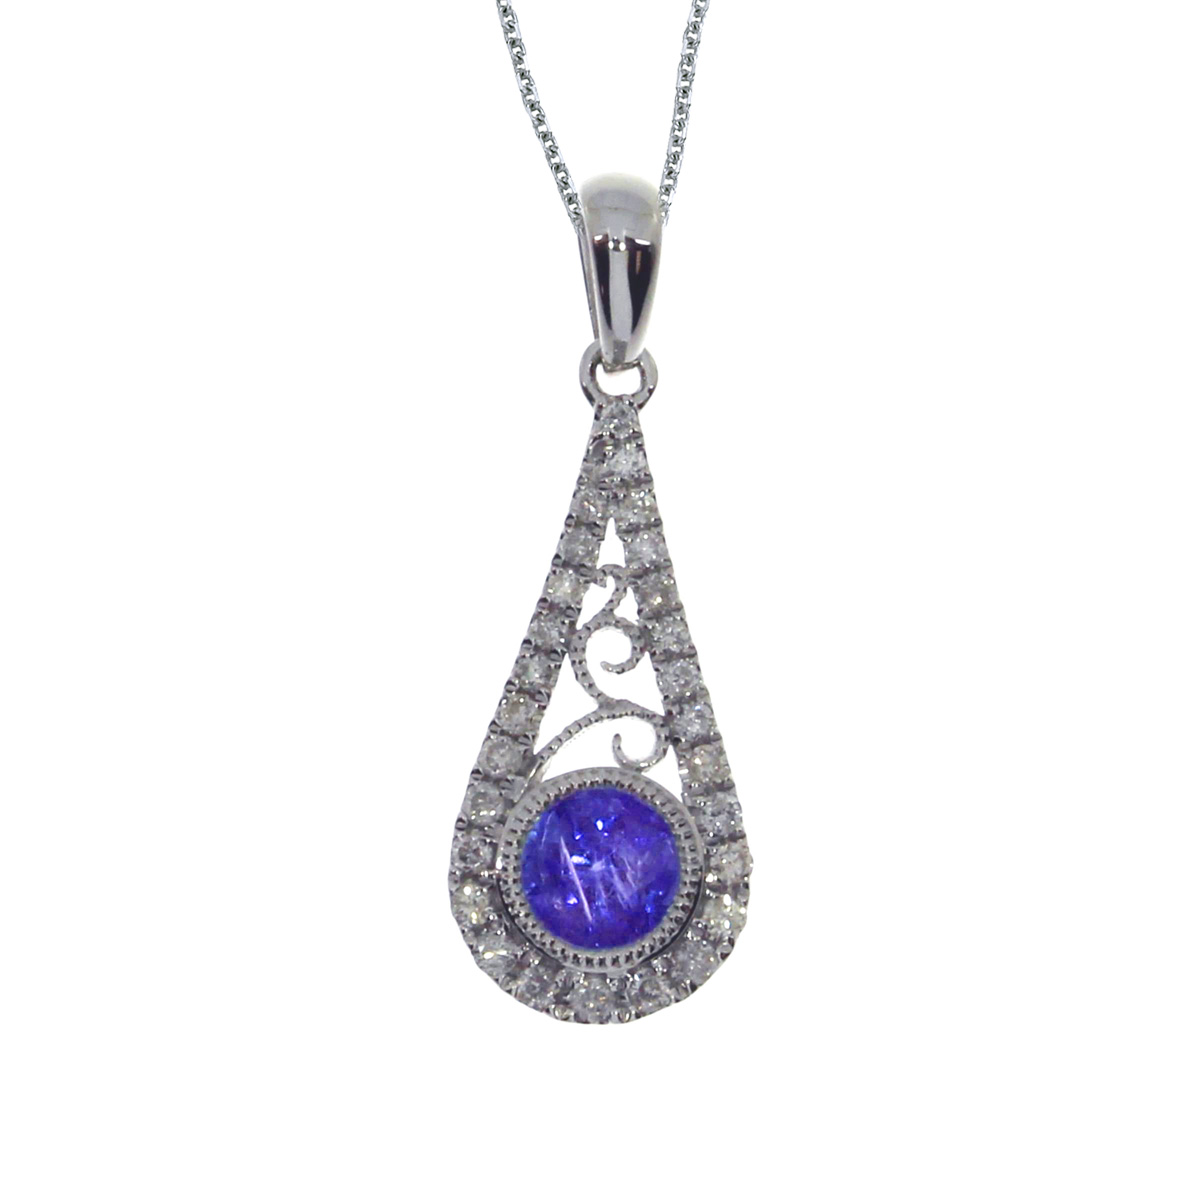 JCX2643: This 14k white gold pendant contains a 5 mm center sapphire with .12 carats of diamonds in a unique design.